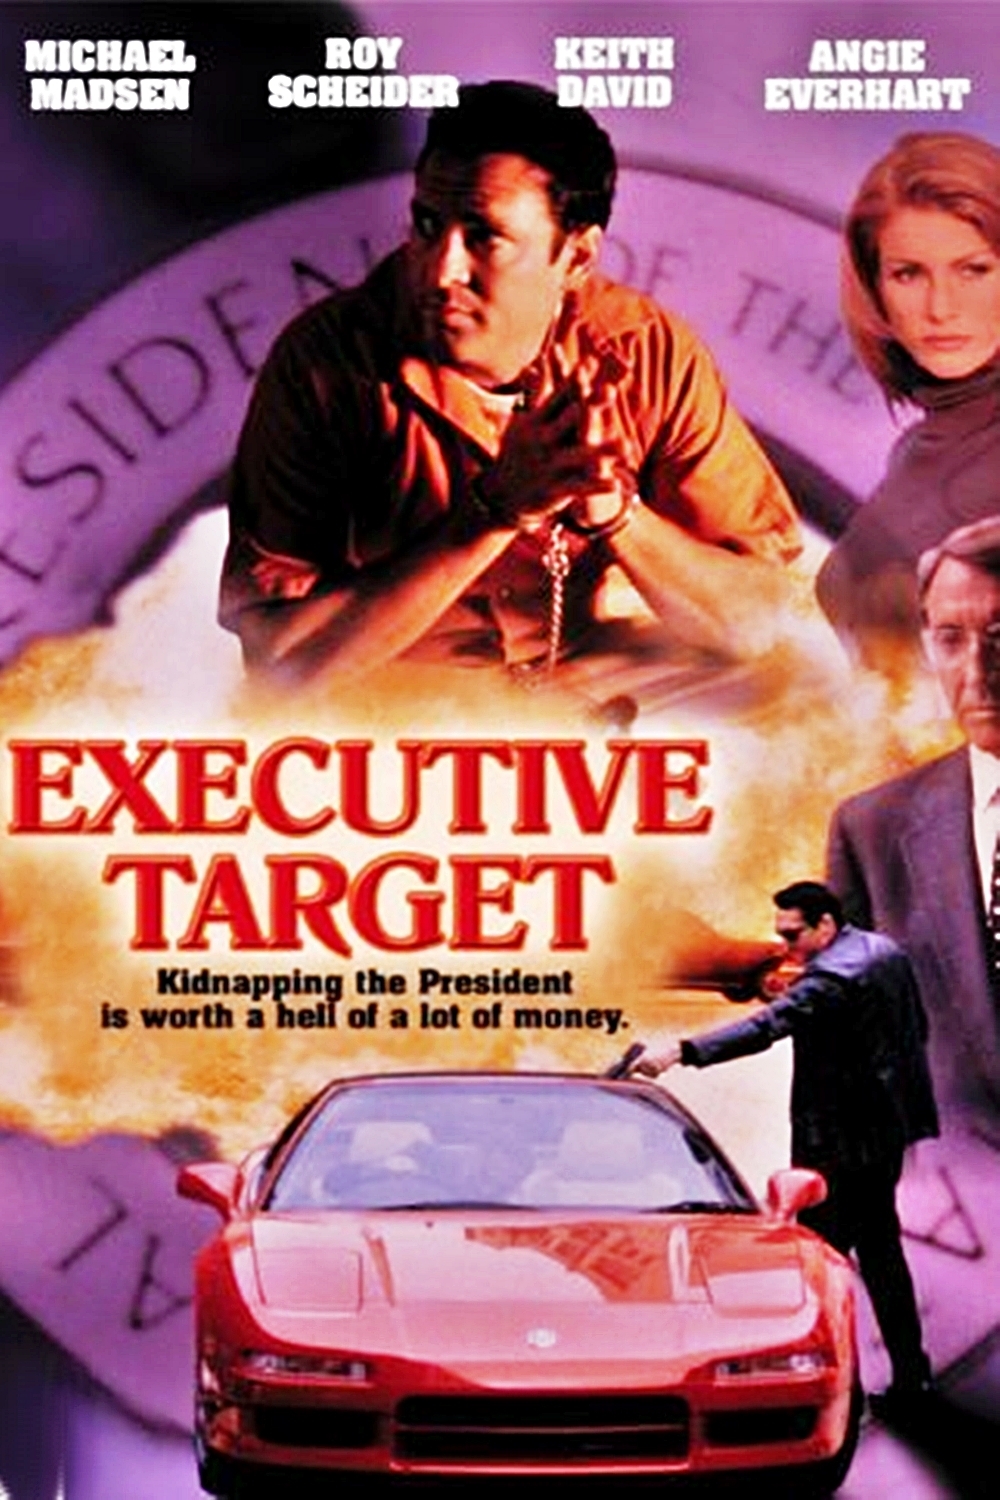 Poster for the movie "Executive Target"